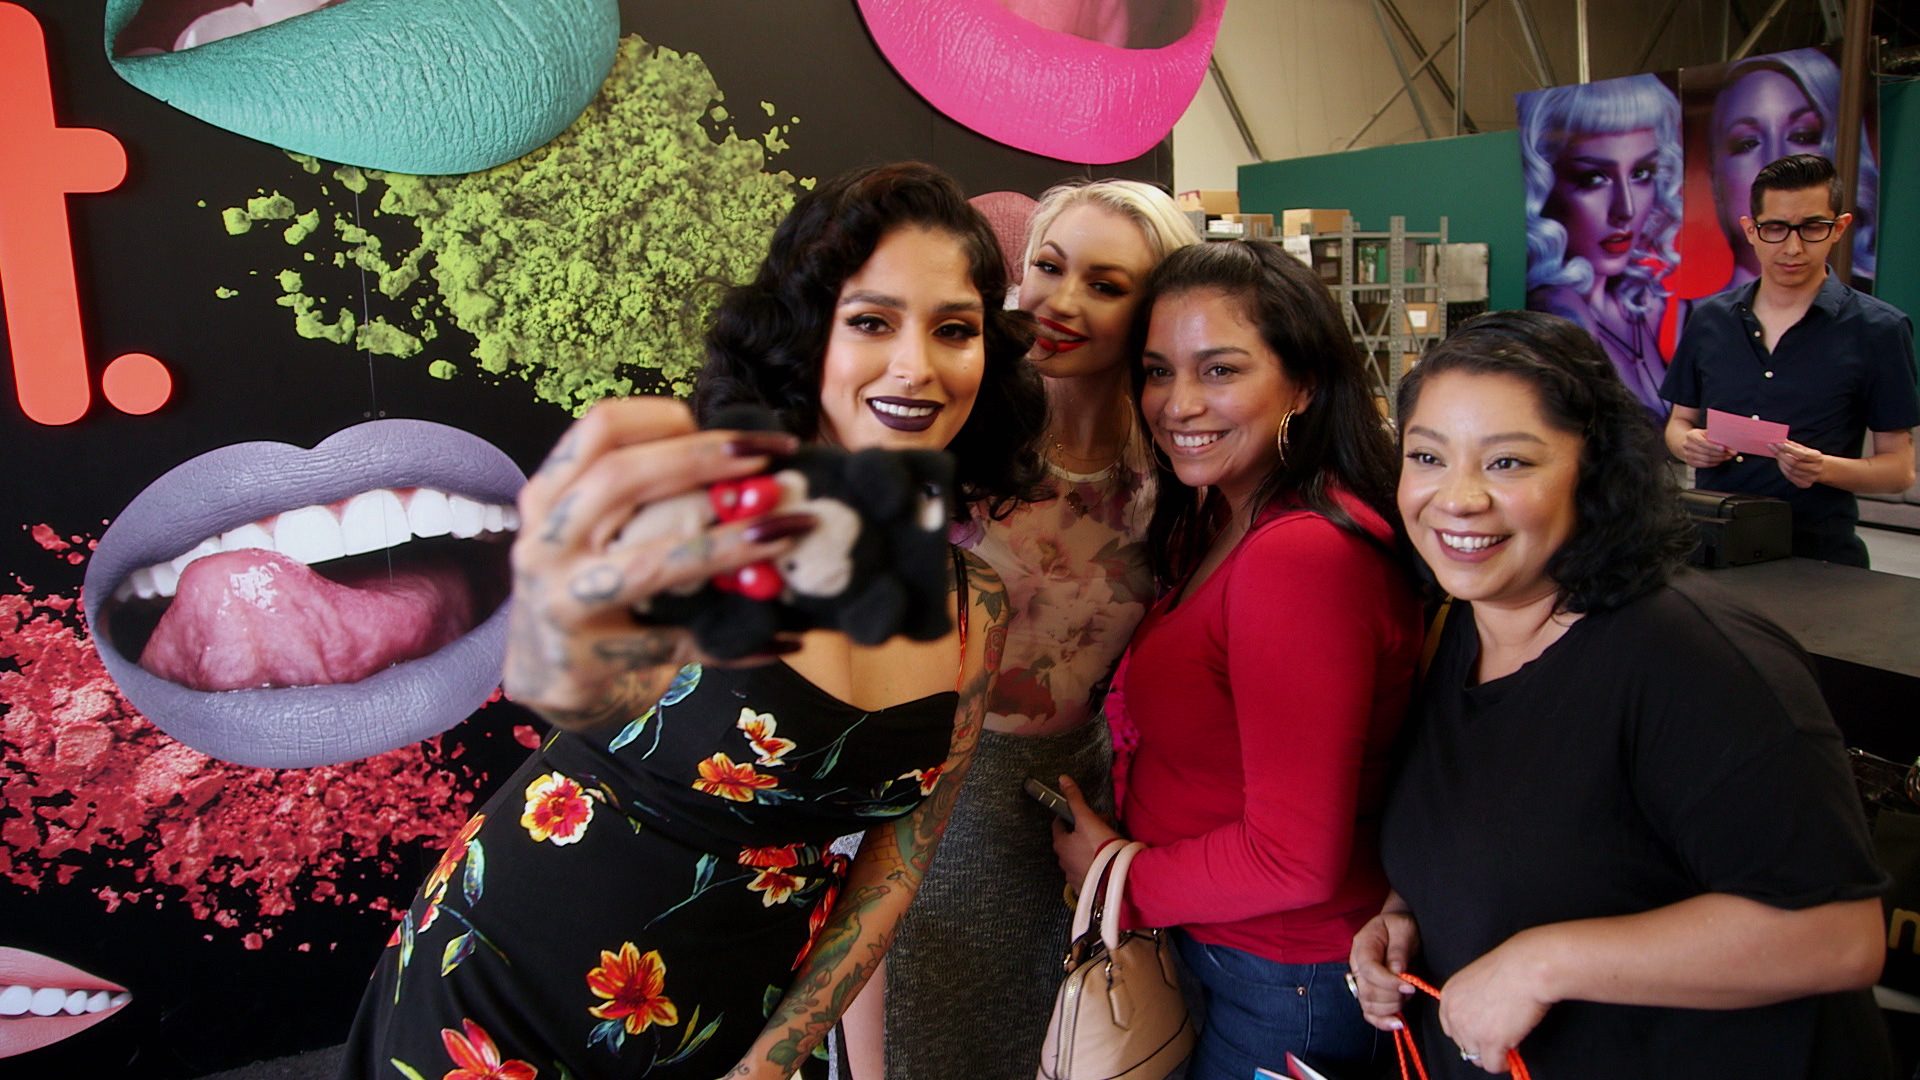 Lora Arellano, Dana Bomar, Co-Founders, CEOs, Makeup Besties, Beauty Business Partners, Female Entrepreneurs, Melt Cosmetics, Selfie With Fans At BBQ Sale, Lipstick Empire, Stage 13 Original, stage13network